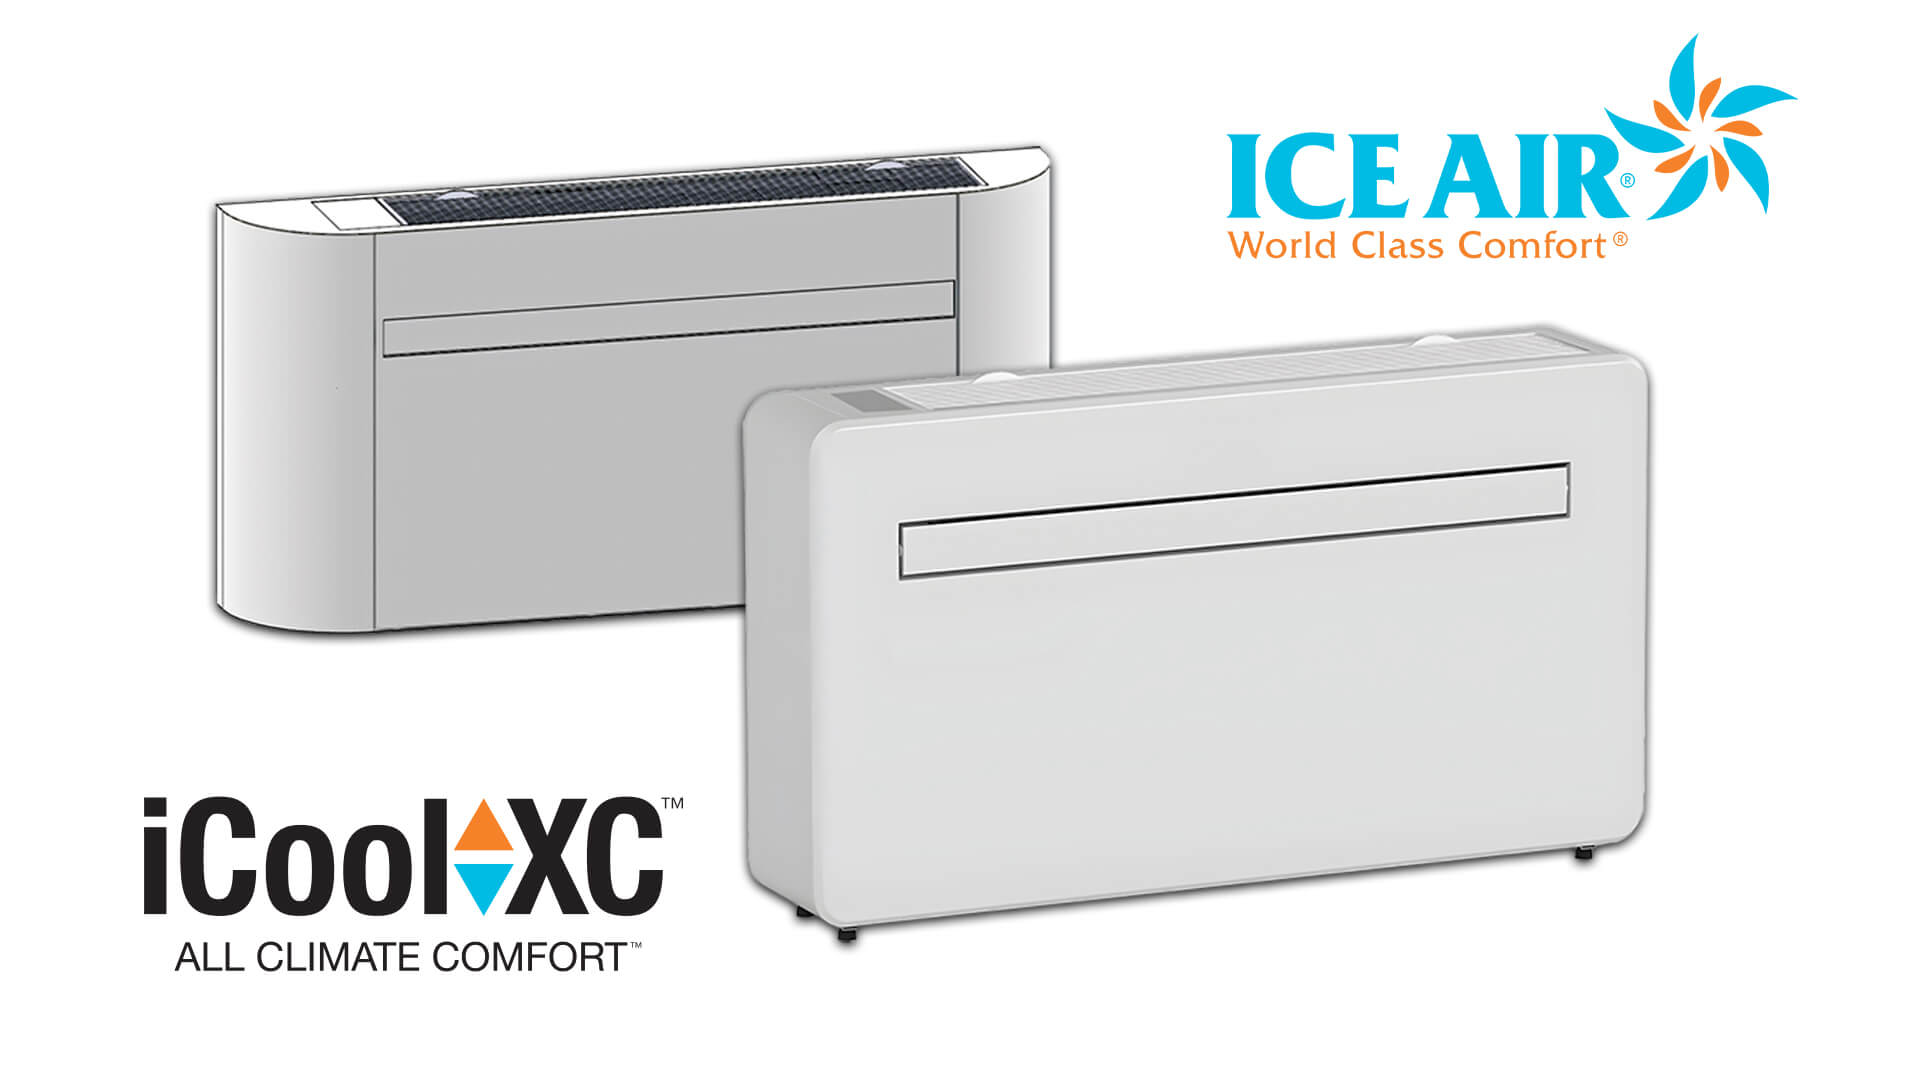 Meet the iCool XC™ - All Electric, All Climate Comfort™ with Zero Emissions